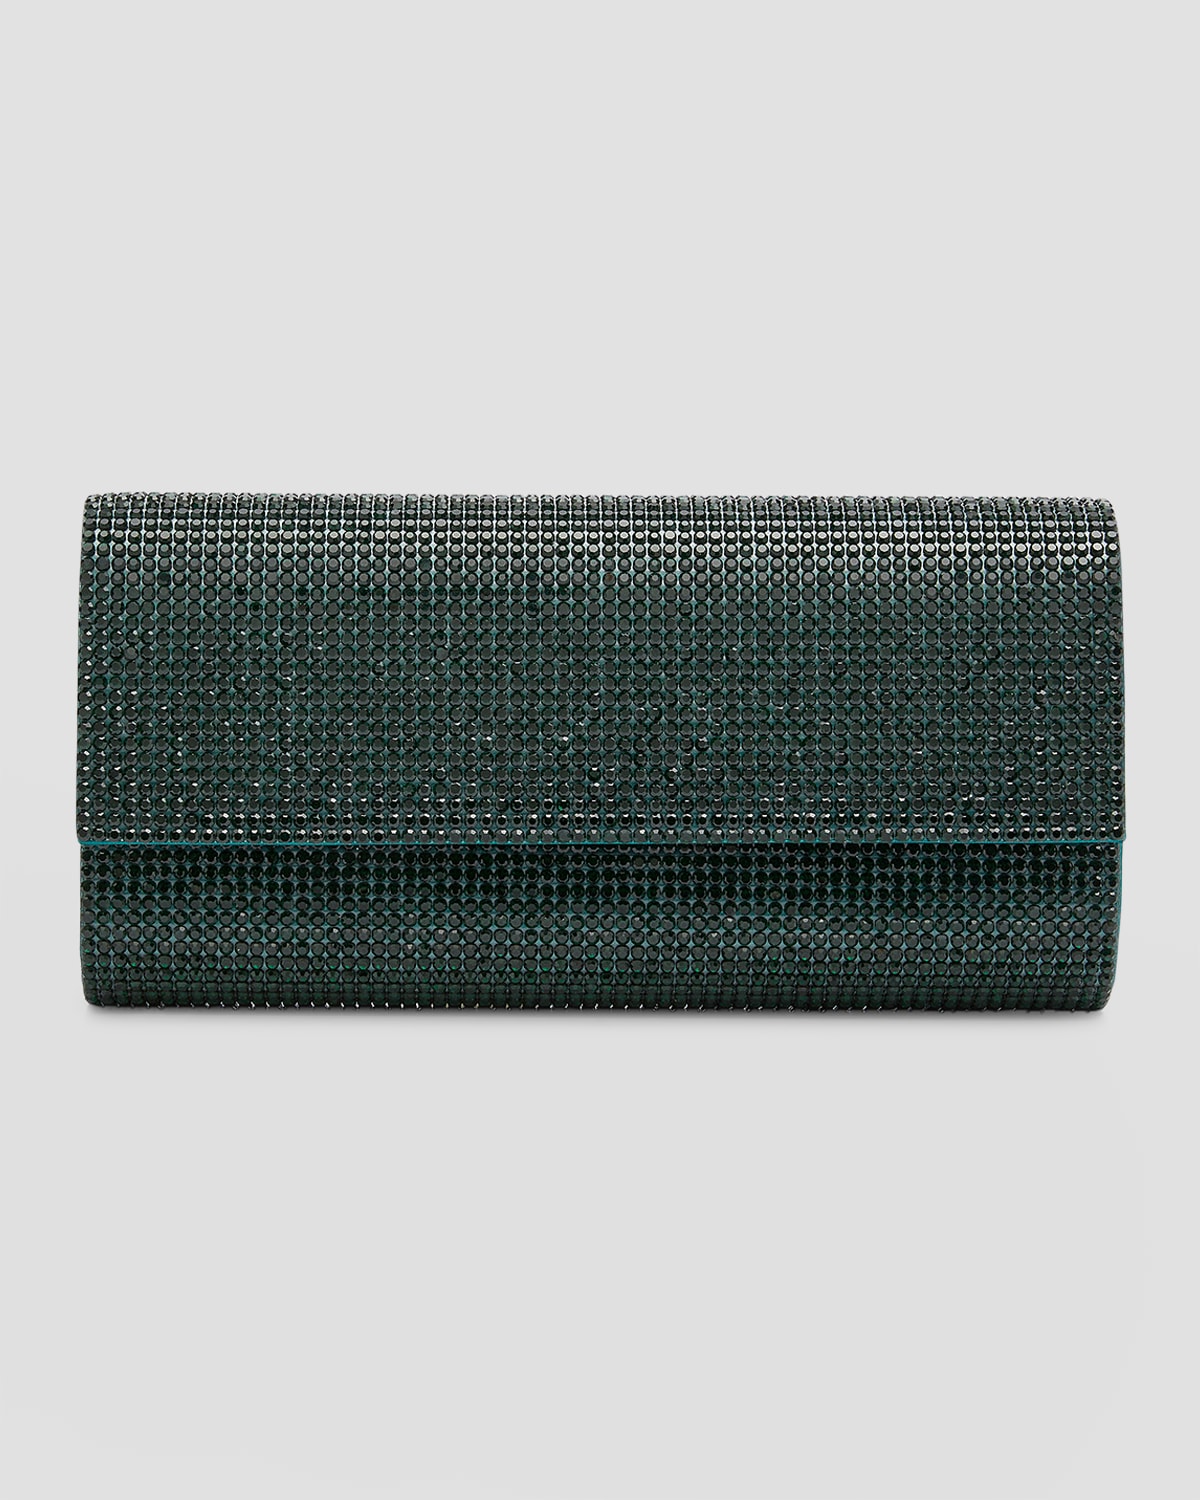 Judith Leiber Perry Beaded Crystal Clutch Bag In Silver Emerald